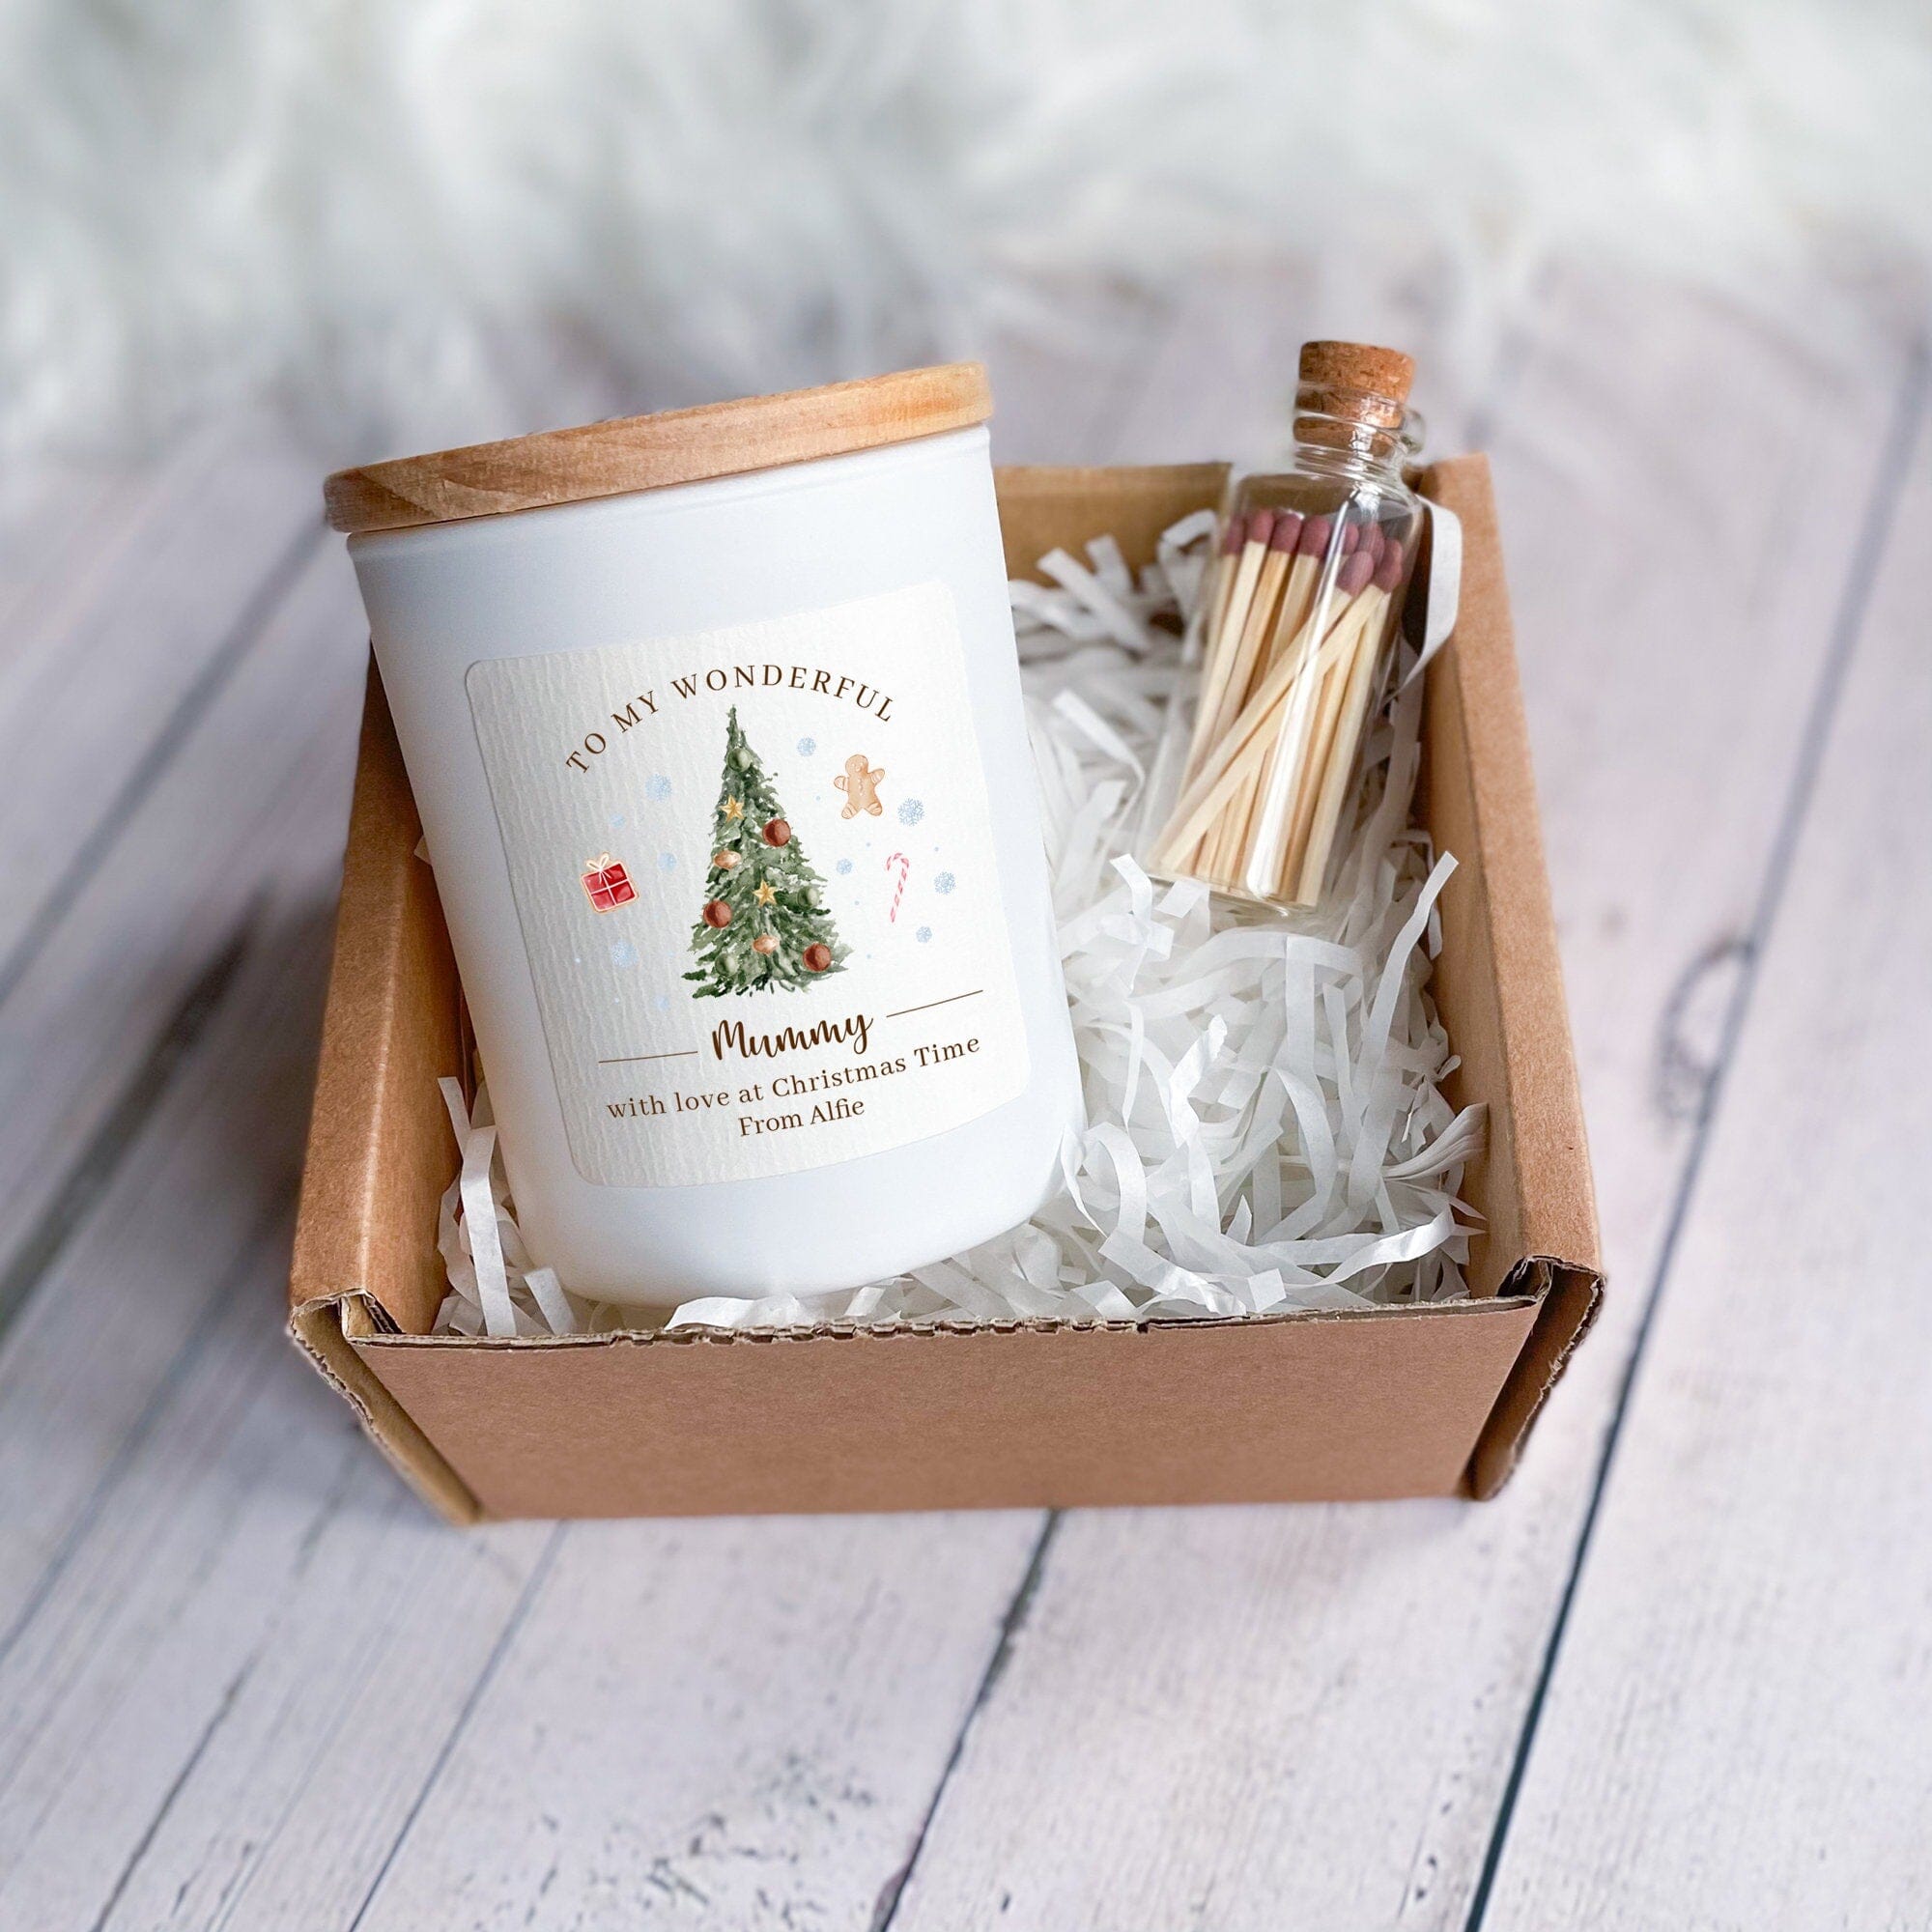 Personalised Scented Candle Christmas Gift for godmother, Gift Box for Her, Merry Christmas Cosy Stylish Unique